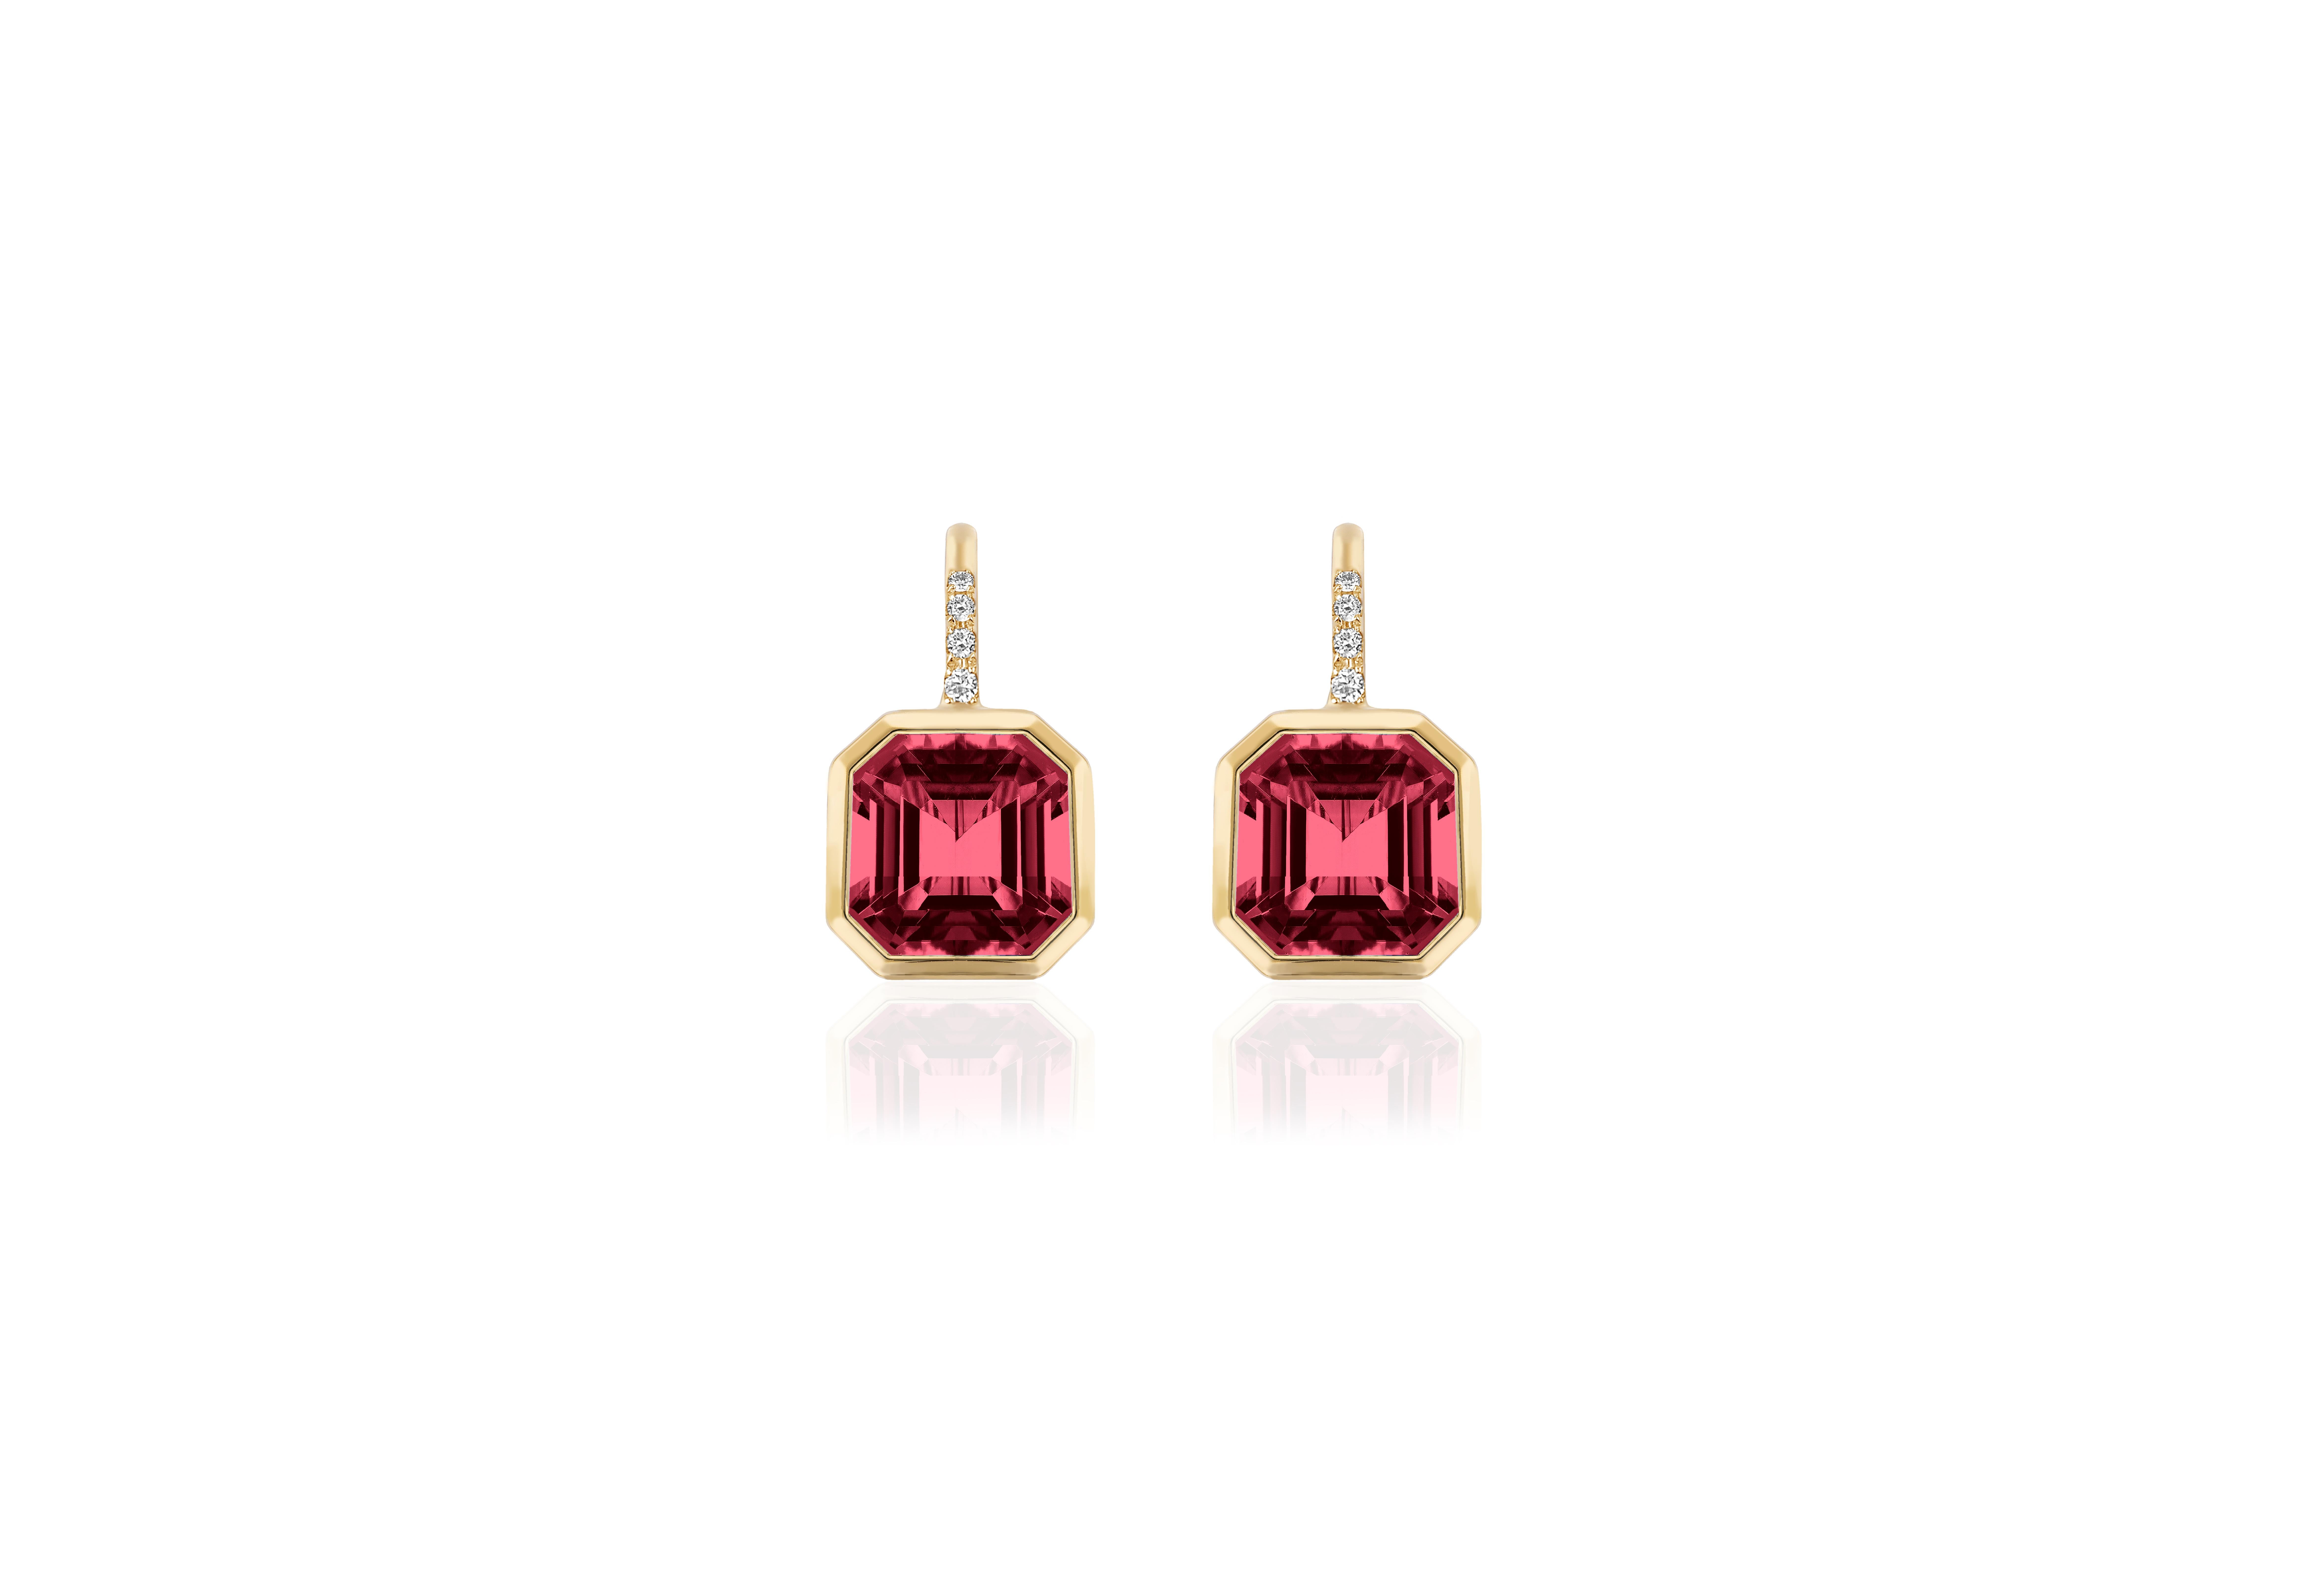 Asscher Cut Garnet Earrings on Wire with Diamonds in 18k Yellow Gold, 'Gossip' Collection. These beautiful earrings are perfect for an everyday look and can be carried to a night out.

* Gemstone size: 9 x 9 mm
* Gemstone: 100% Earth Mined 
*